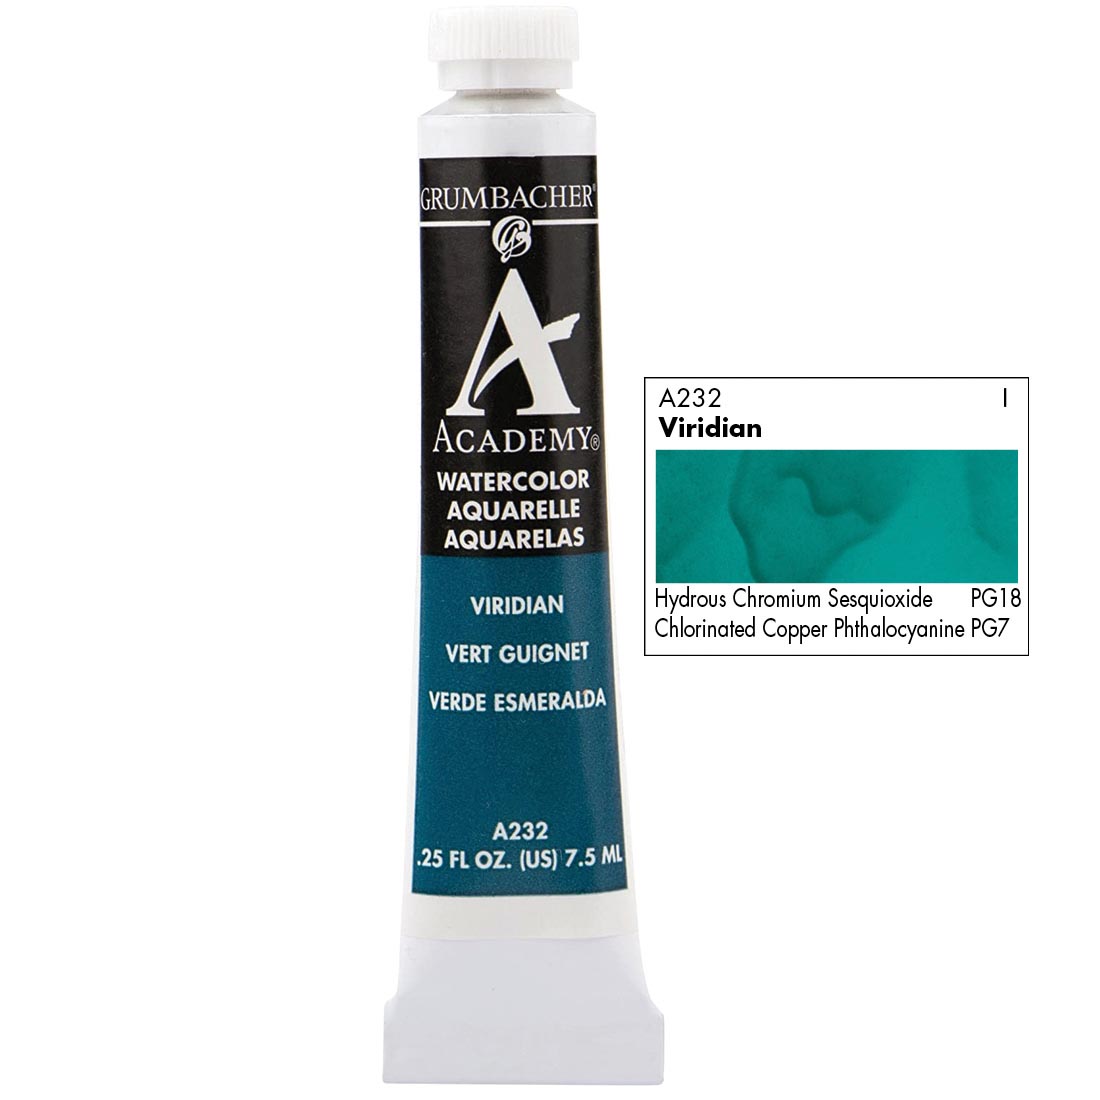 Tube of Grumbacher Academy Watercolor beside Viridian color swatch